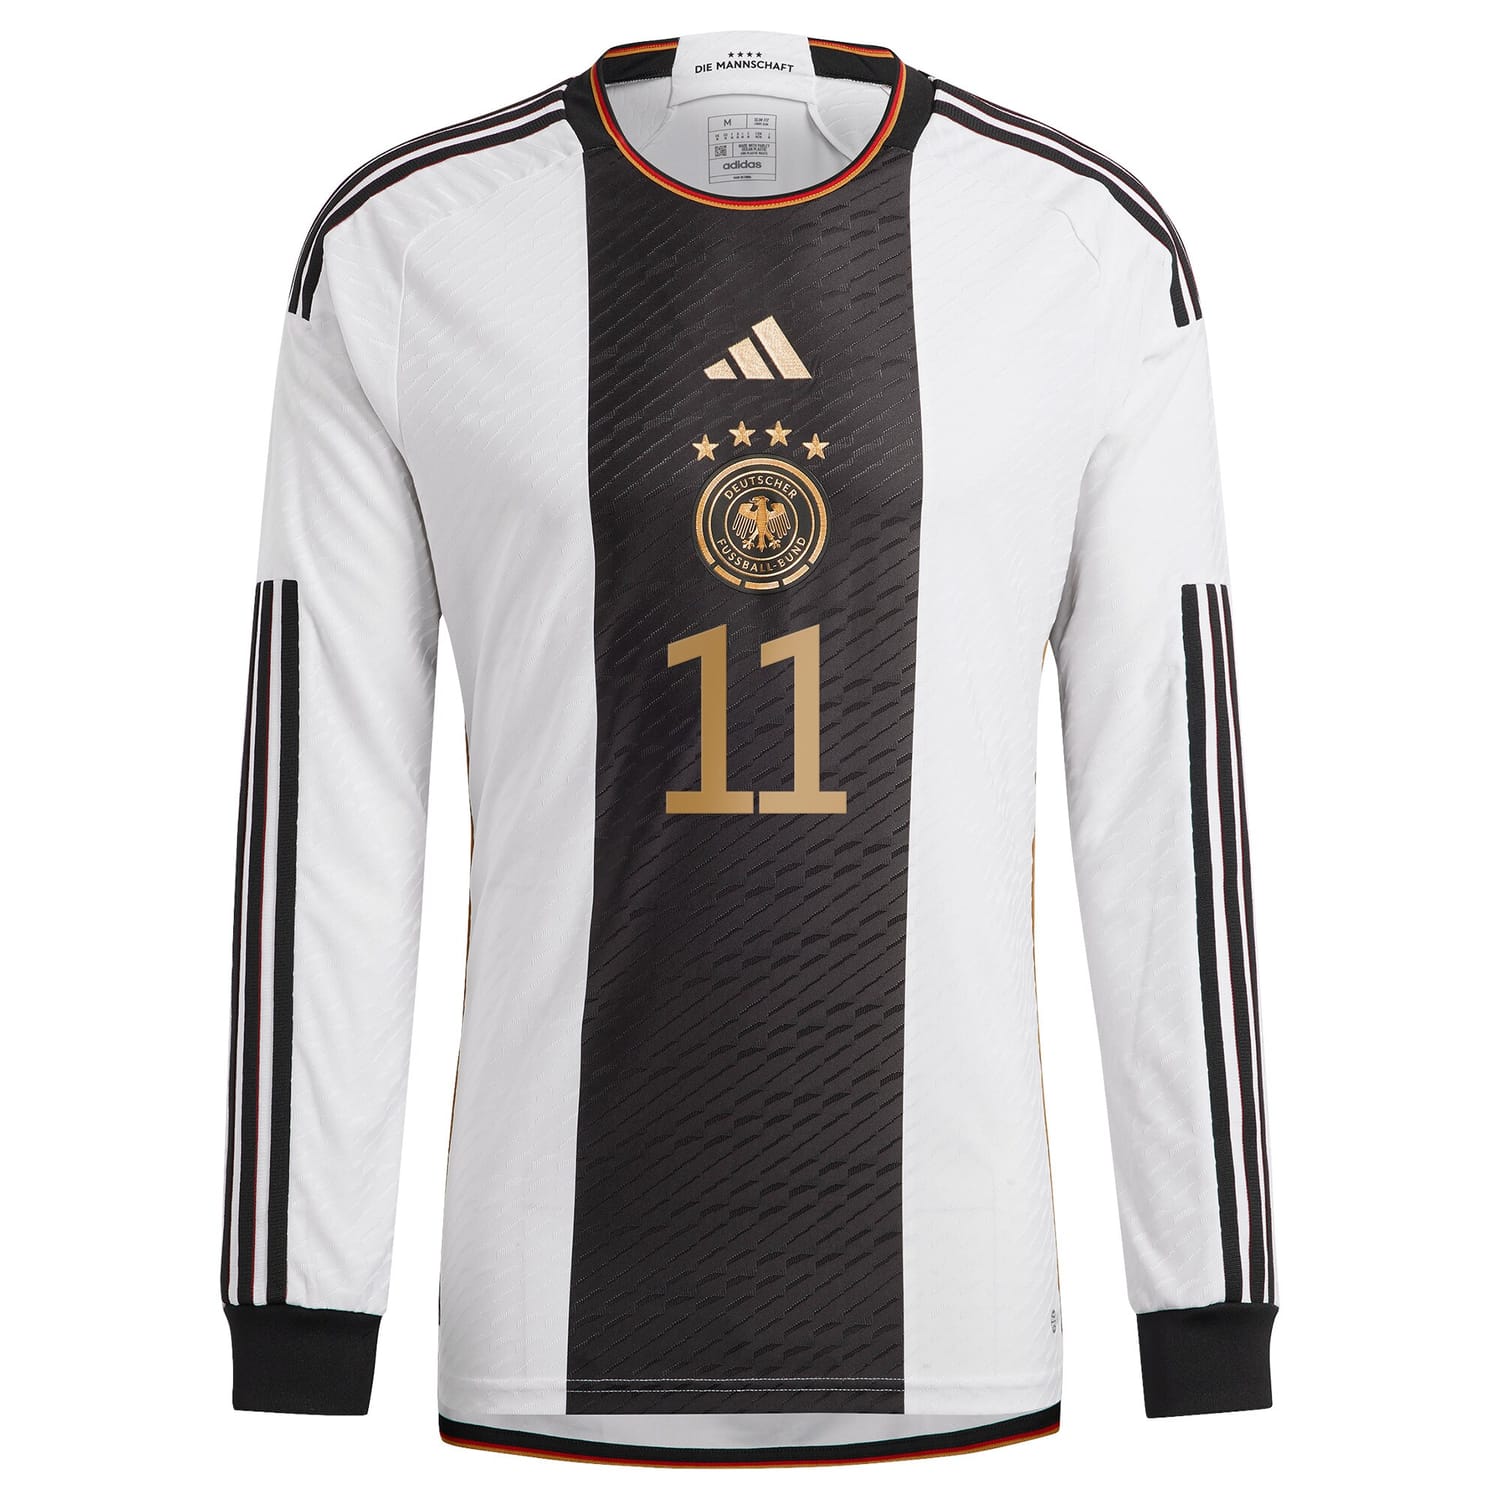 Germany National Team Home Authentic Jersey Shirt Long Sleeve 2022 player Mario Götze 11 printing for Men